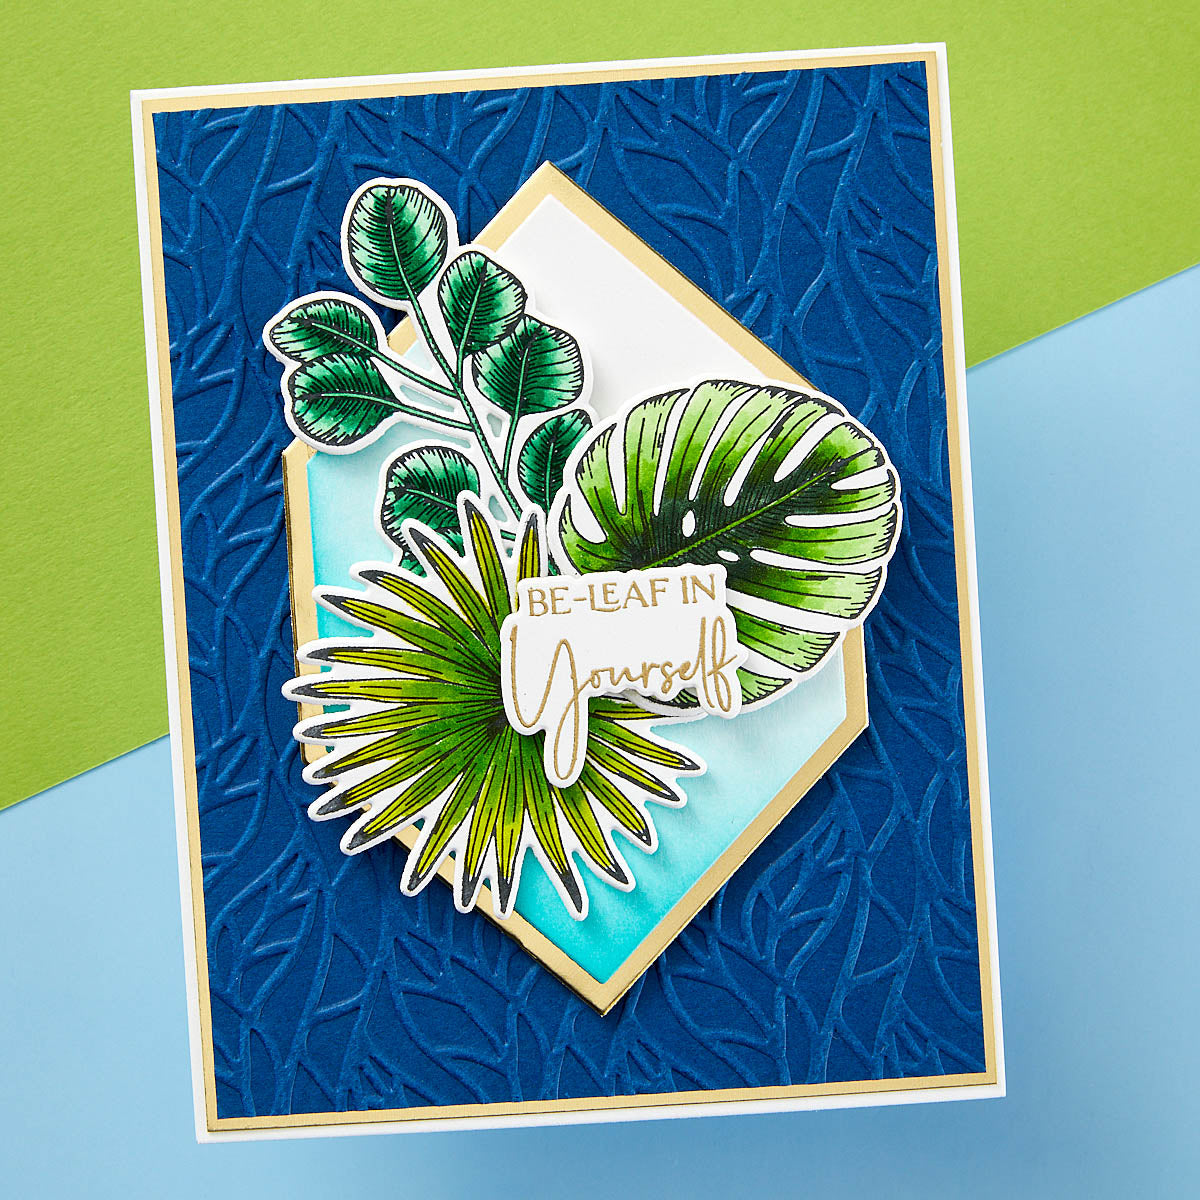 Spellbinders - Leafy Helix Embossing Folder from the Propagation Garden Collection by Annie Williams